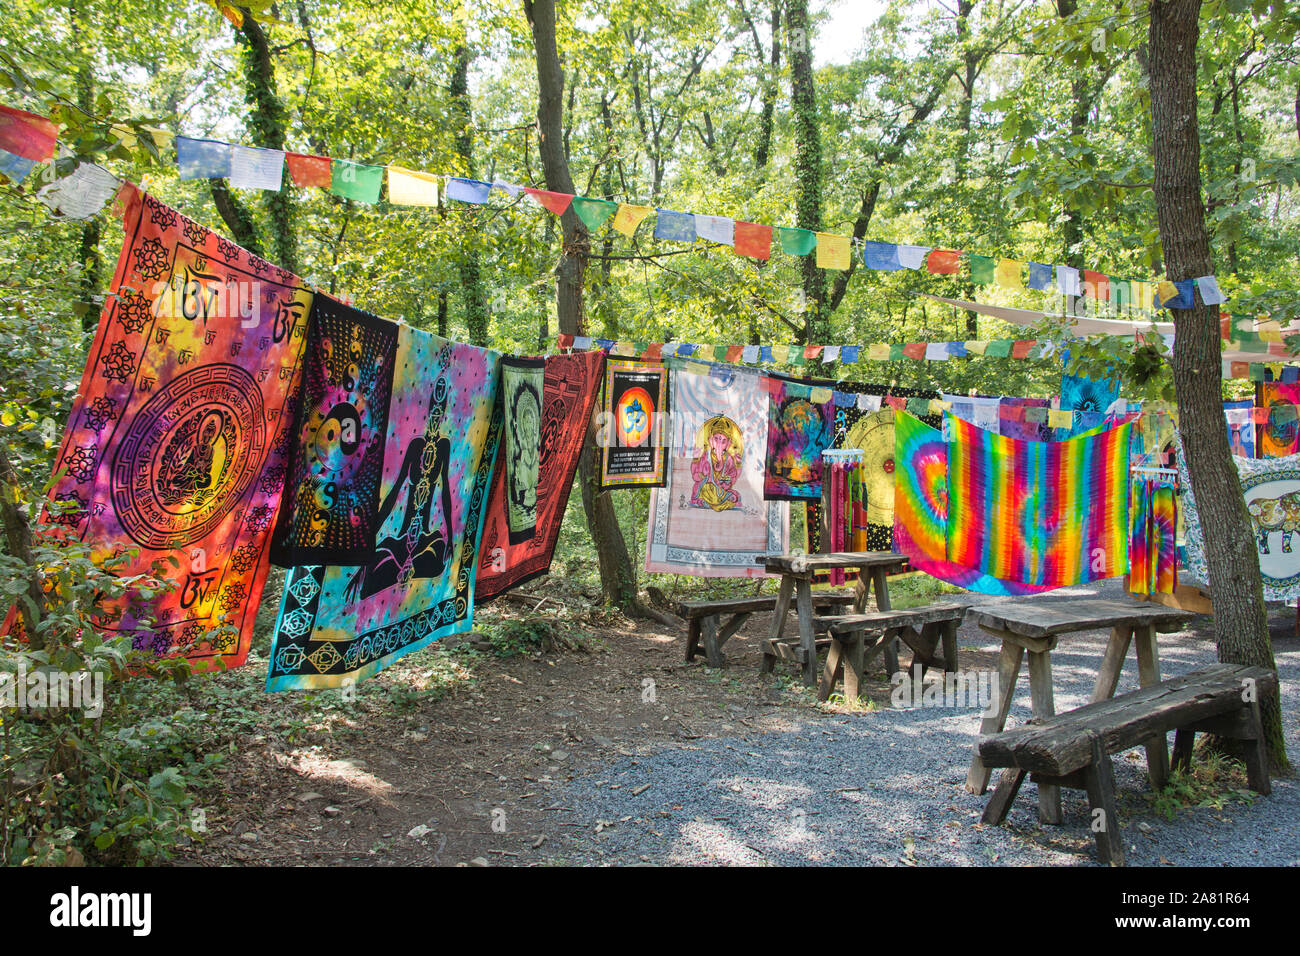 Colorful batik cloths hanging on a clothesline in the forest Stock Photo